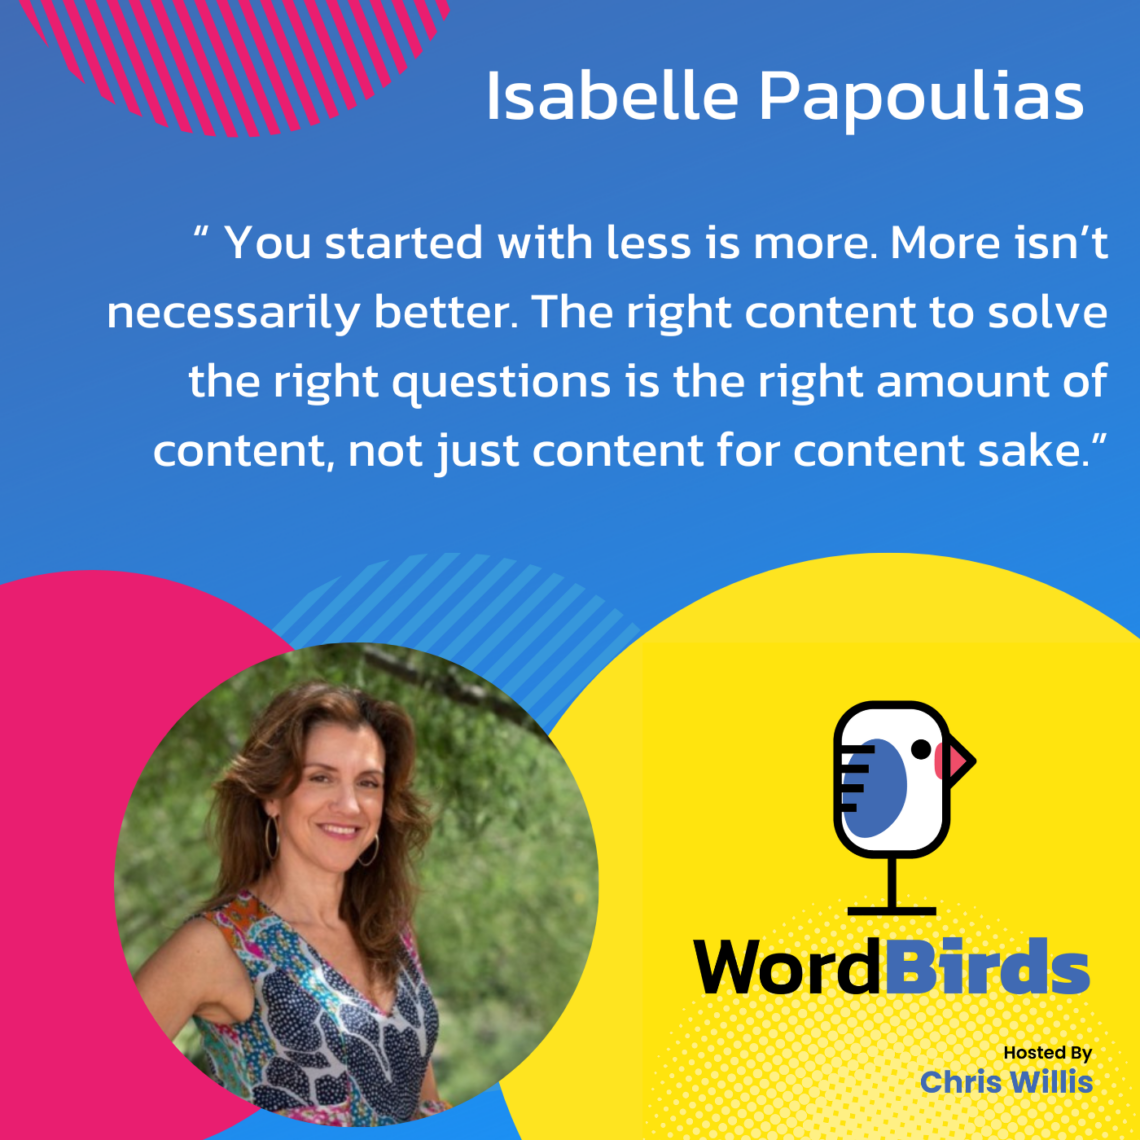 On a blue background there's a quote from Isabelle Papoulias in white that takes up the majority of the image. The bottom of the image has a headshot image of Isabelle and the WordBirds Podcast logo.